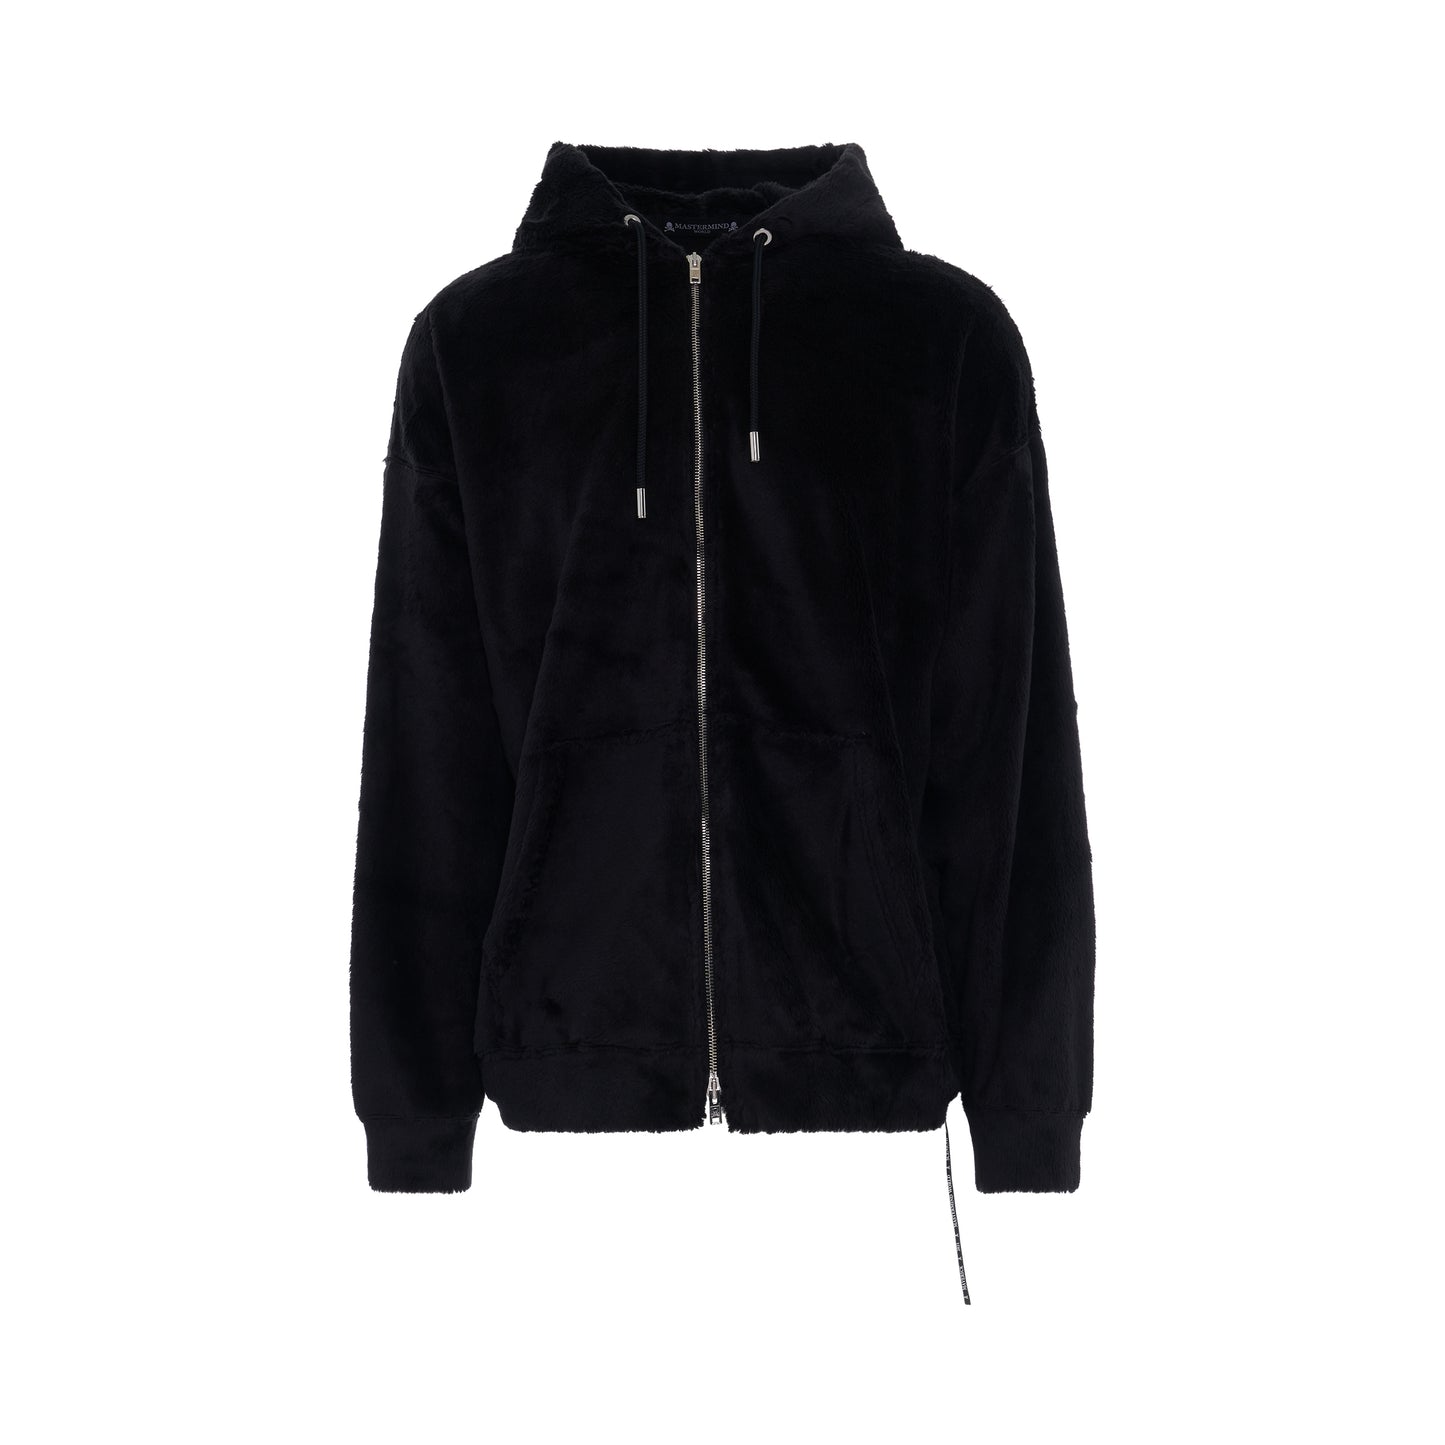 Sherpa Patchworked Skull Boxy Fit Hoodie in Black